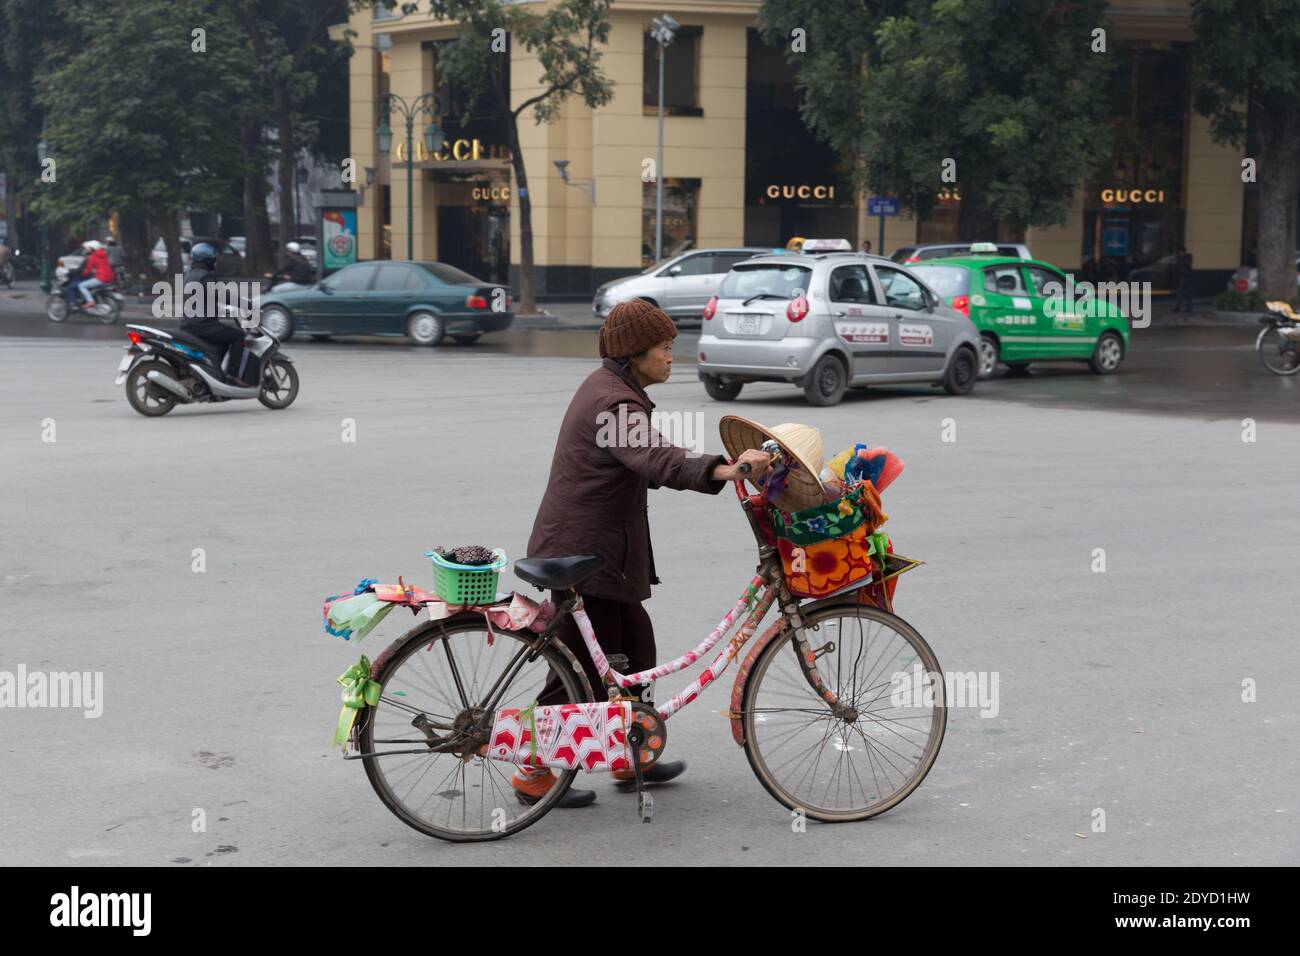 Vietnam Hanoi Old woman with decorated bike passing Gucci store Stock Photo  - Alamy